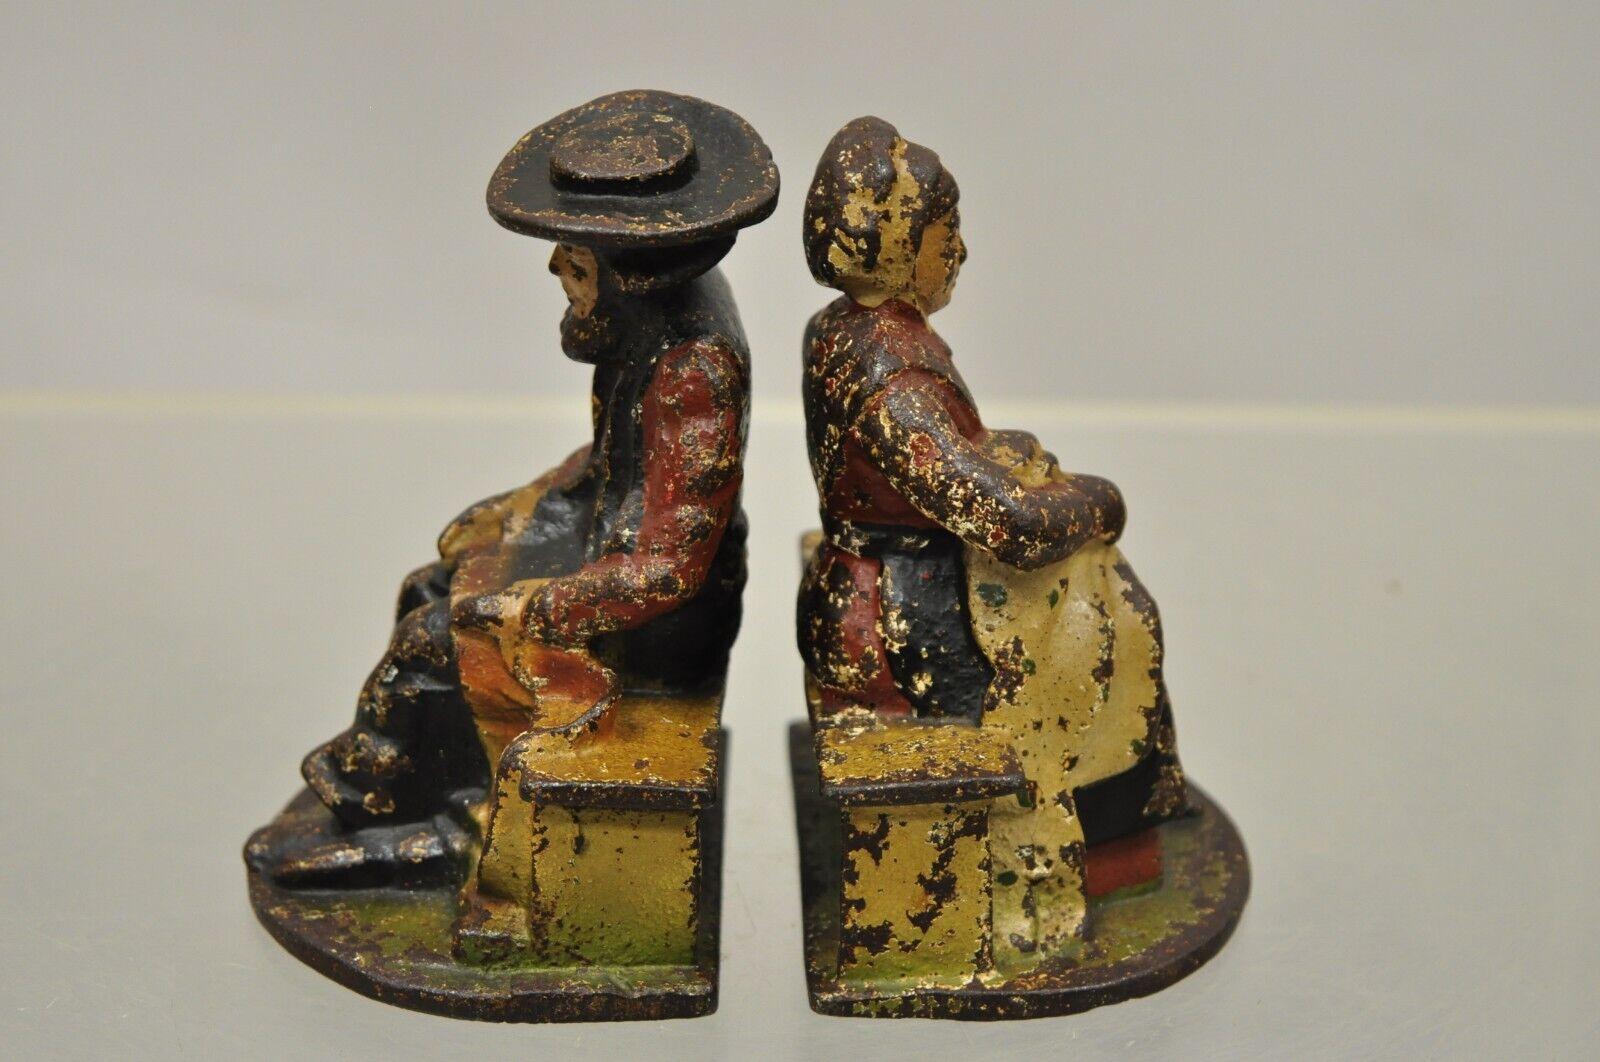 Antique Cast Iron Amish Man and Woman Couple Bookends, a Pair In Good Condition For Sale In Philadelphia, PA